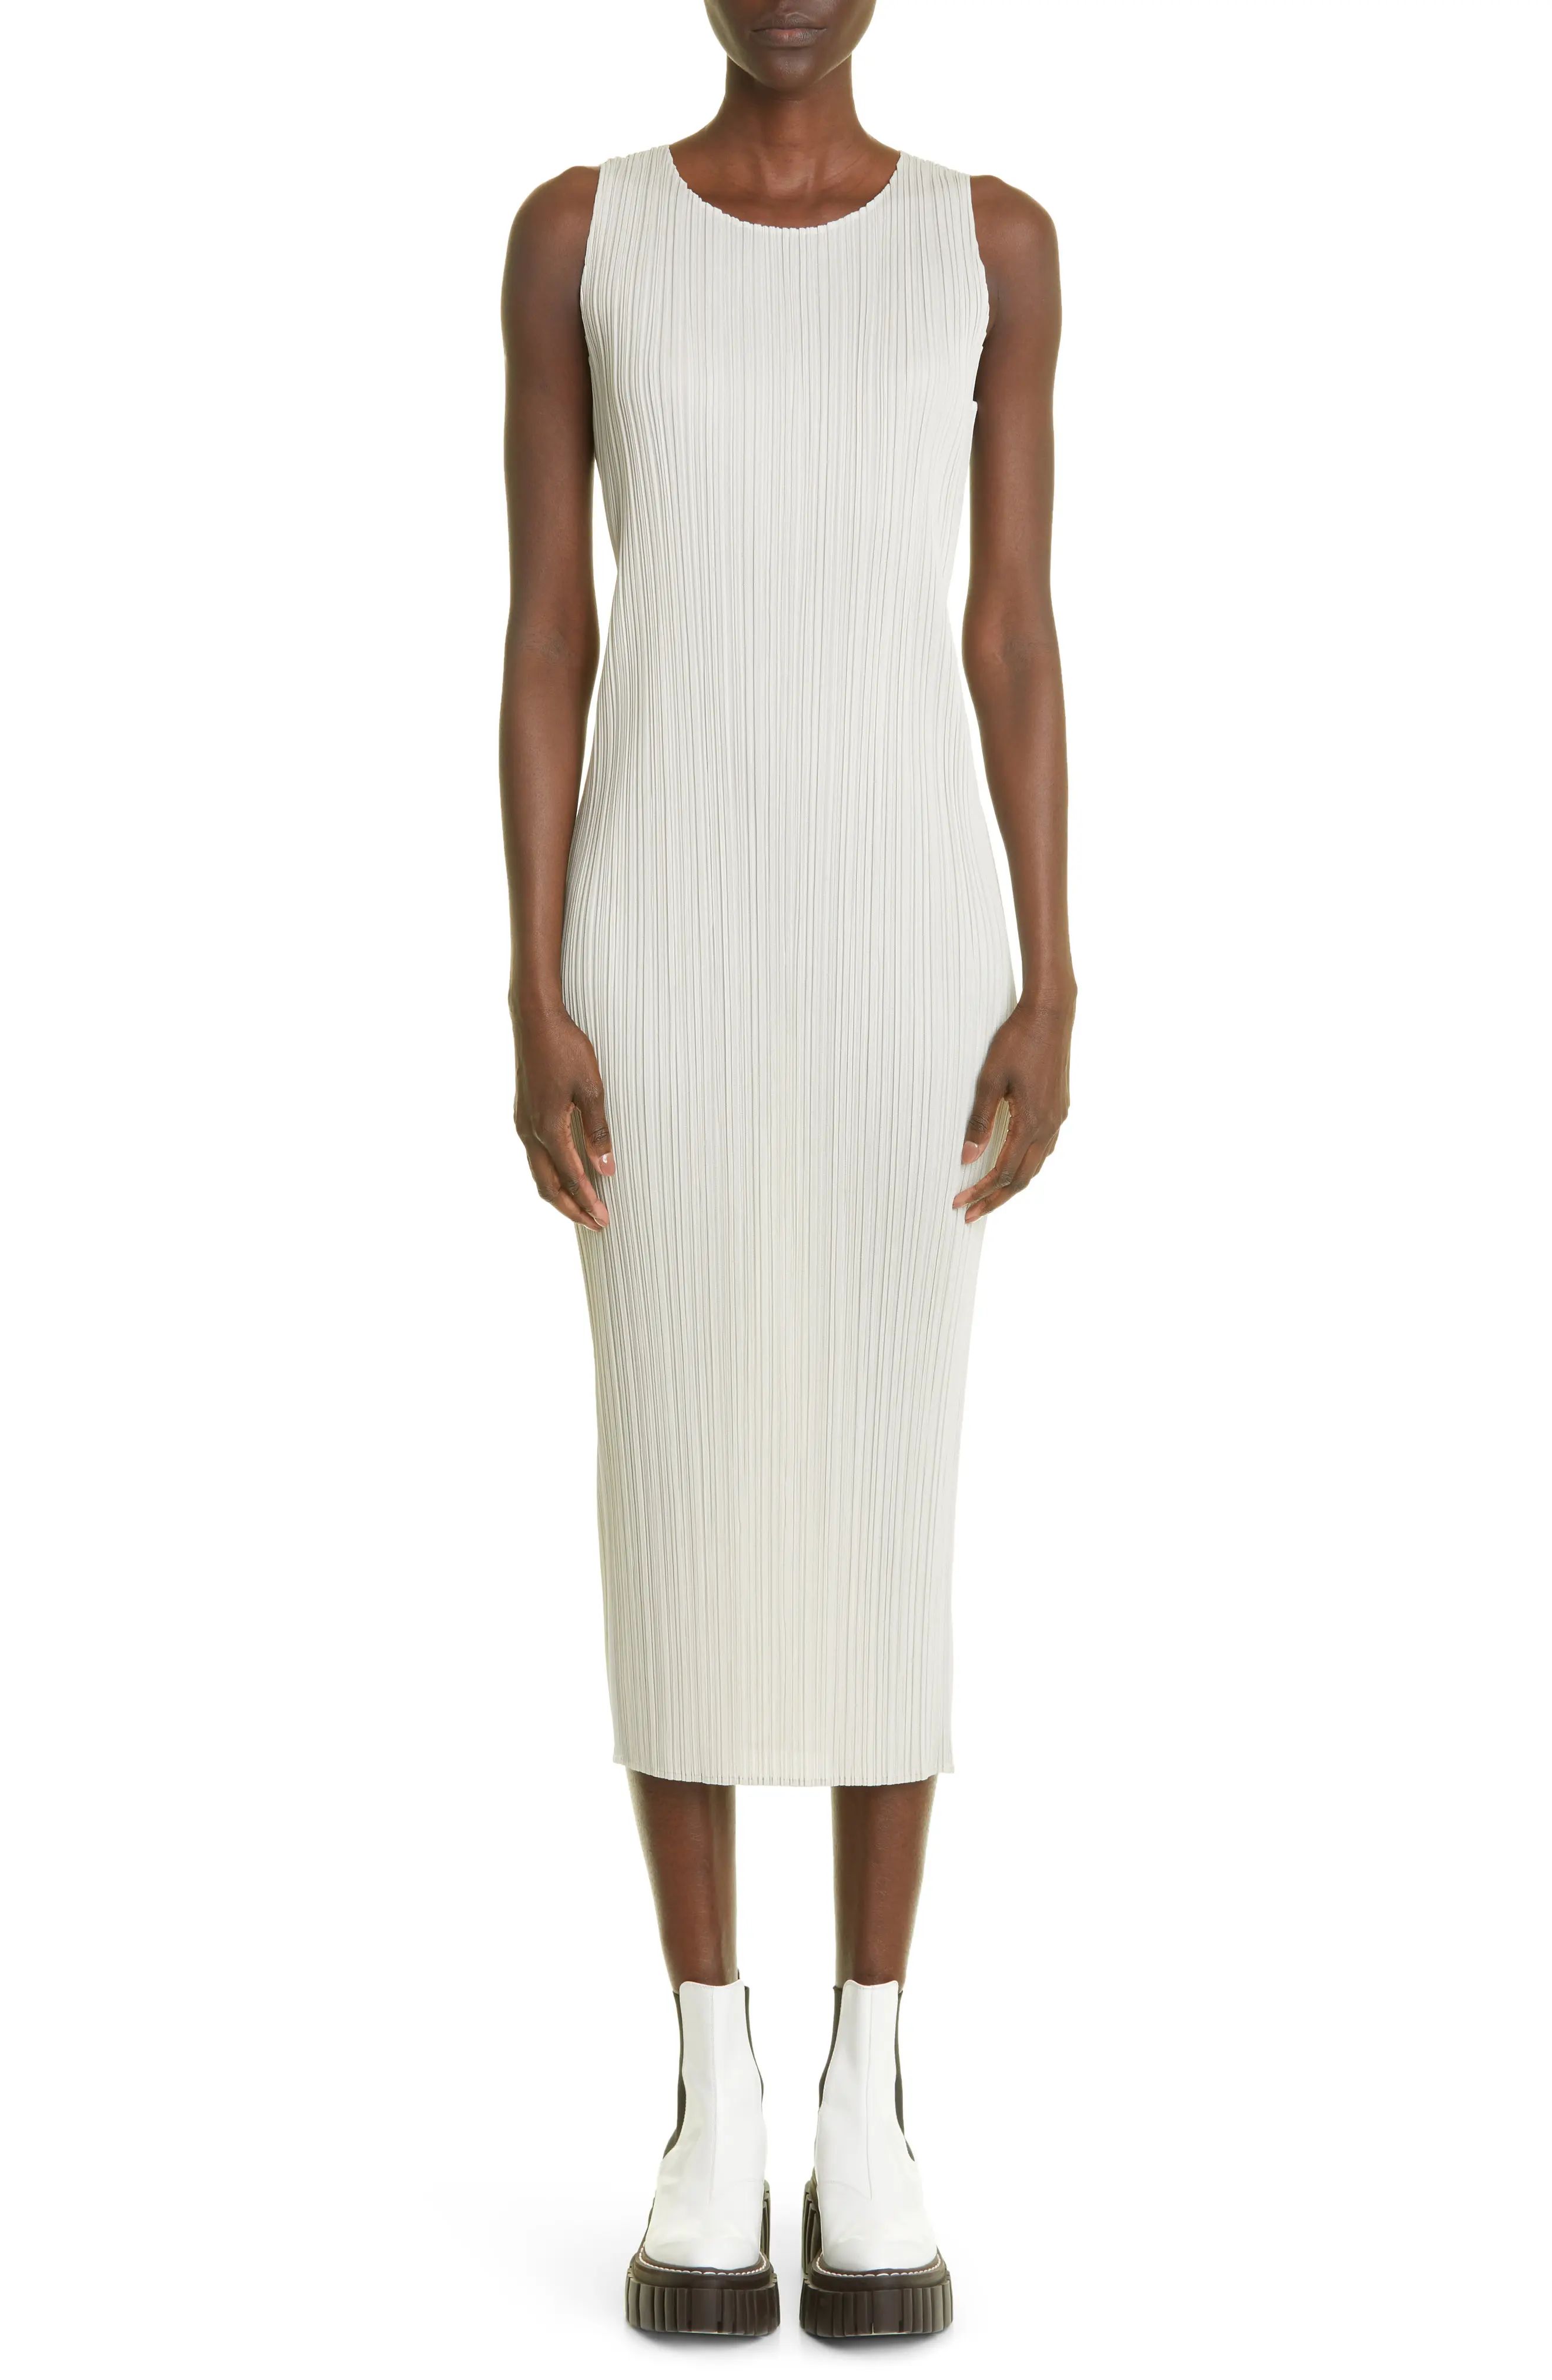 Pleats Please Issey Miyake Basics 2 Pleated Midi Dress in Light Beige at Nordstrom, Size 4 | Nordstrom